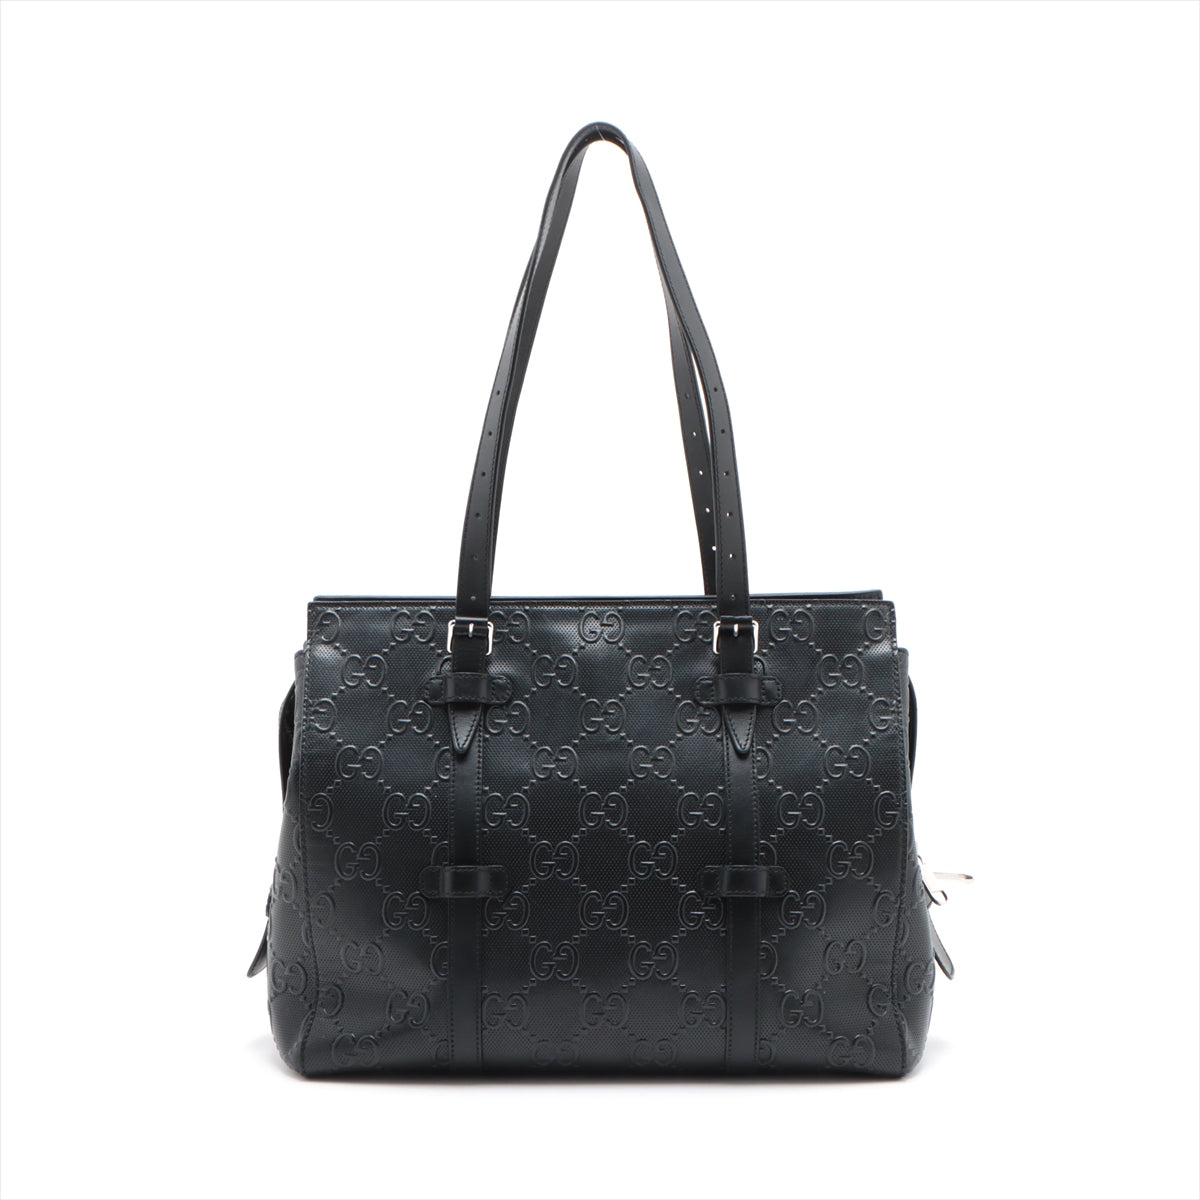 Gucci GG Embos Leather Tote Bag Black 625774